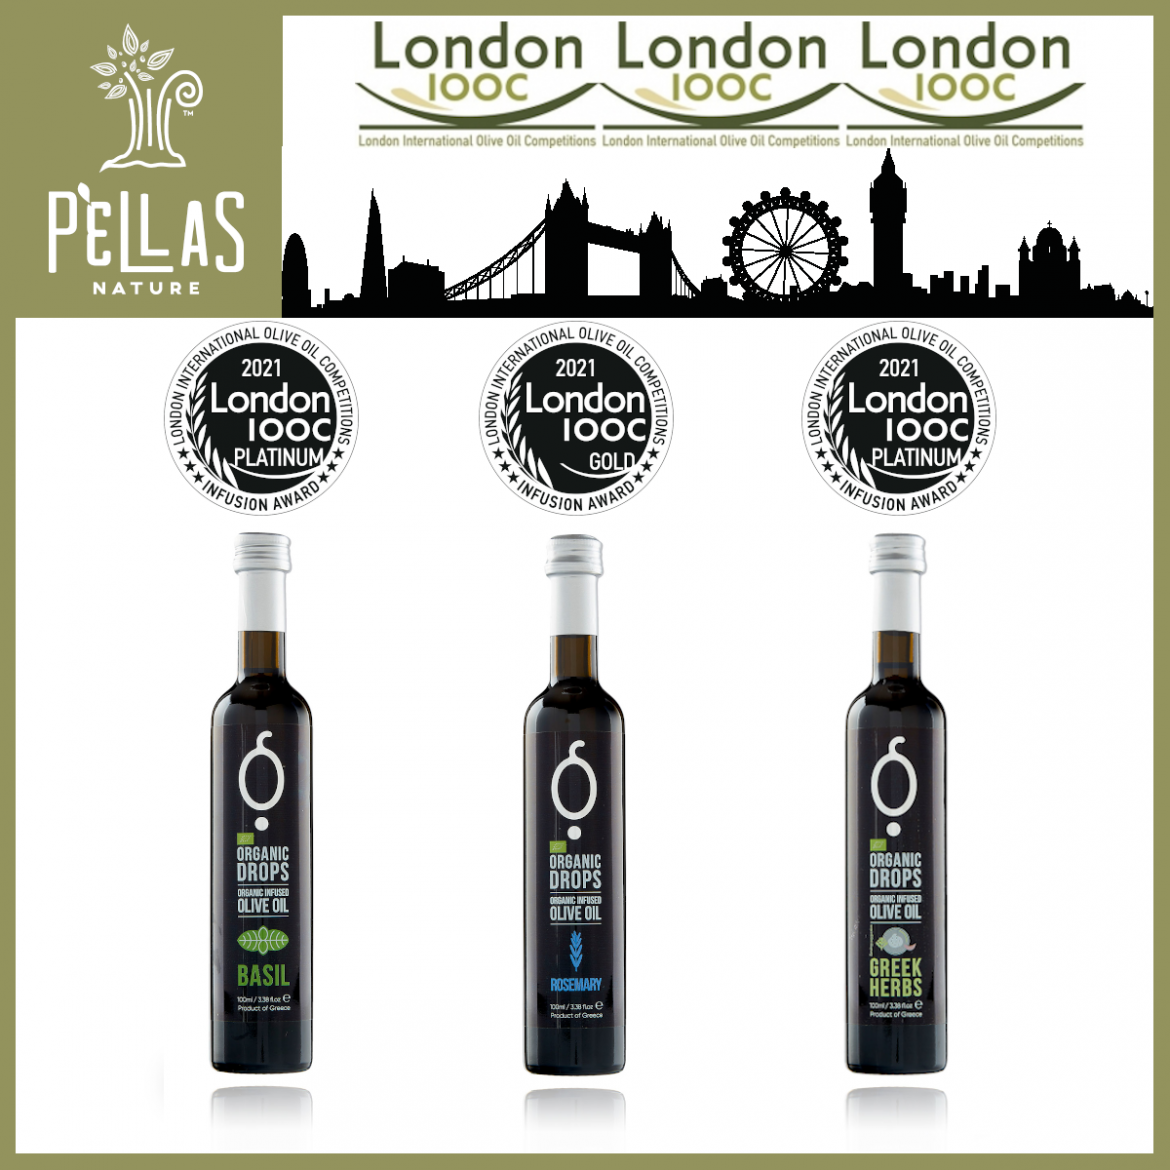 PellasNature_SM_Medals_London-2021-1.png